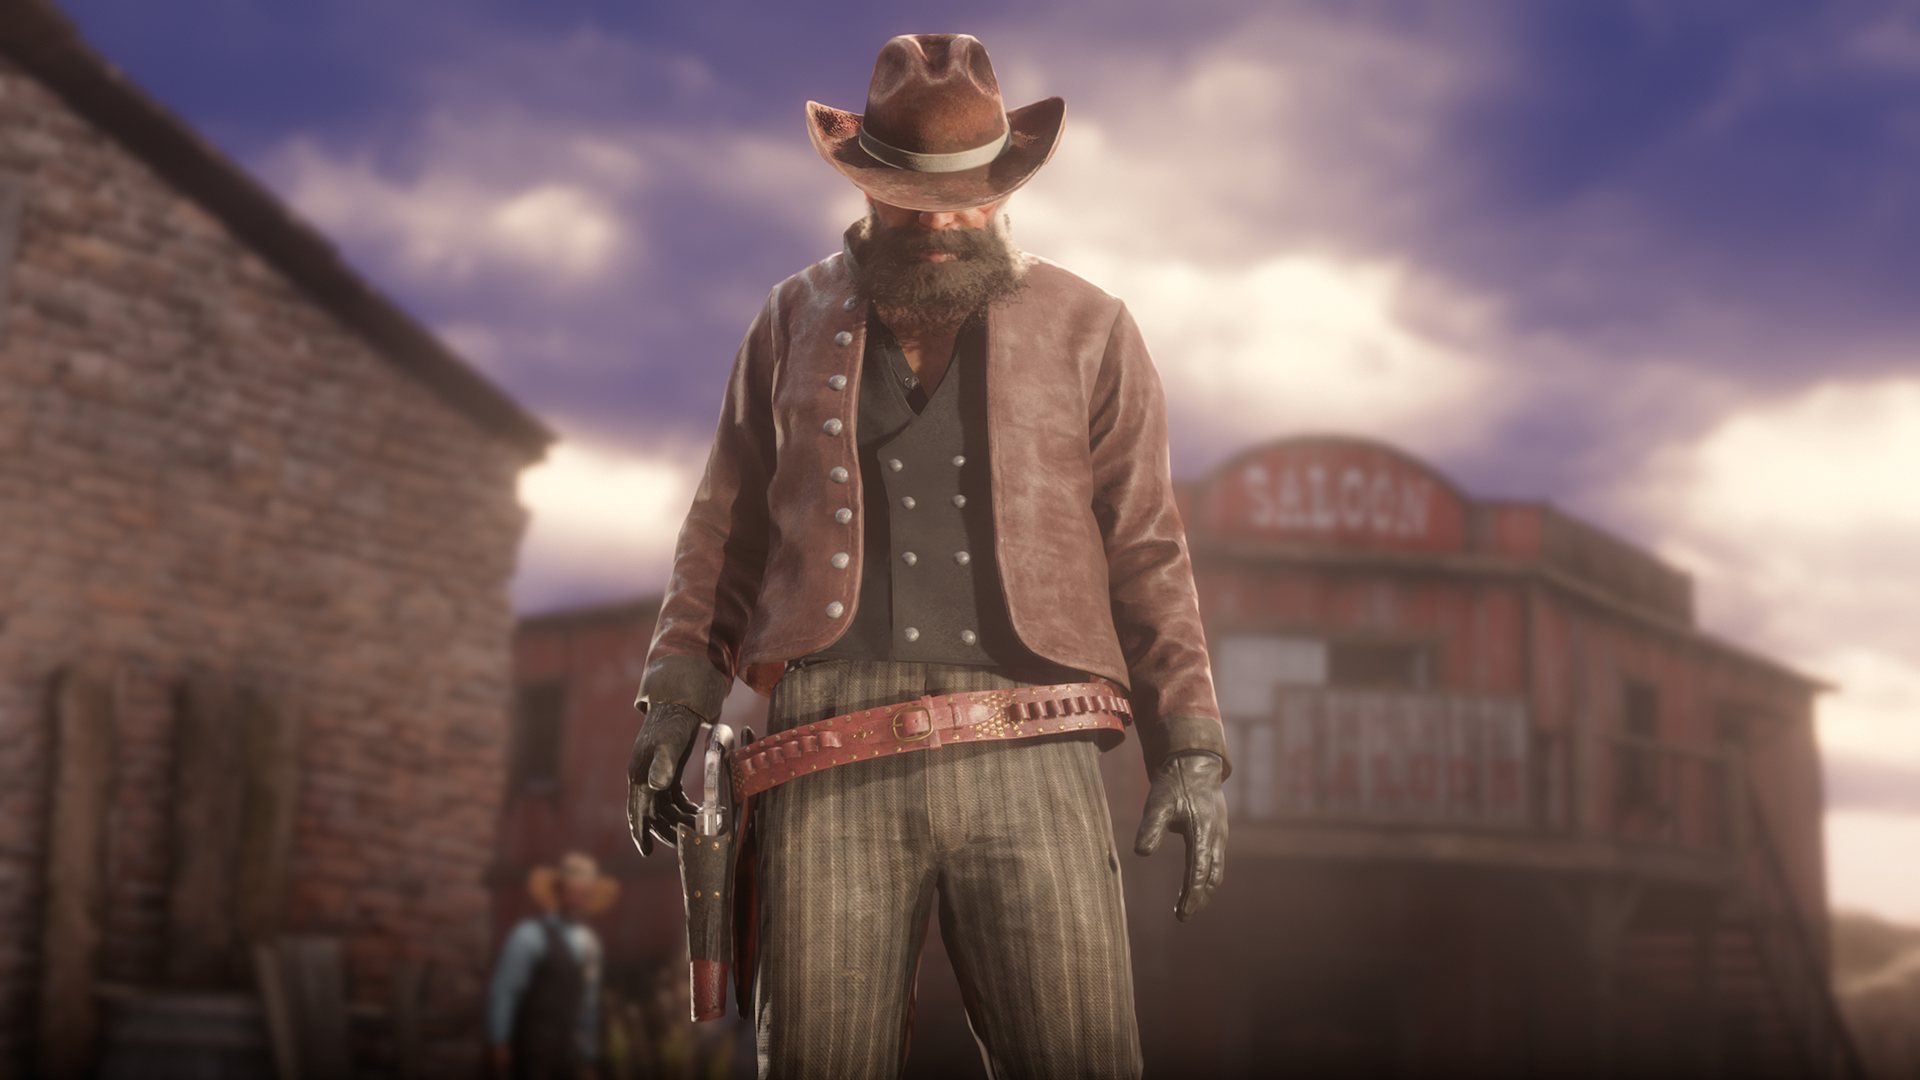 ps4 disc space required for red dead redemption 2